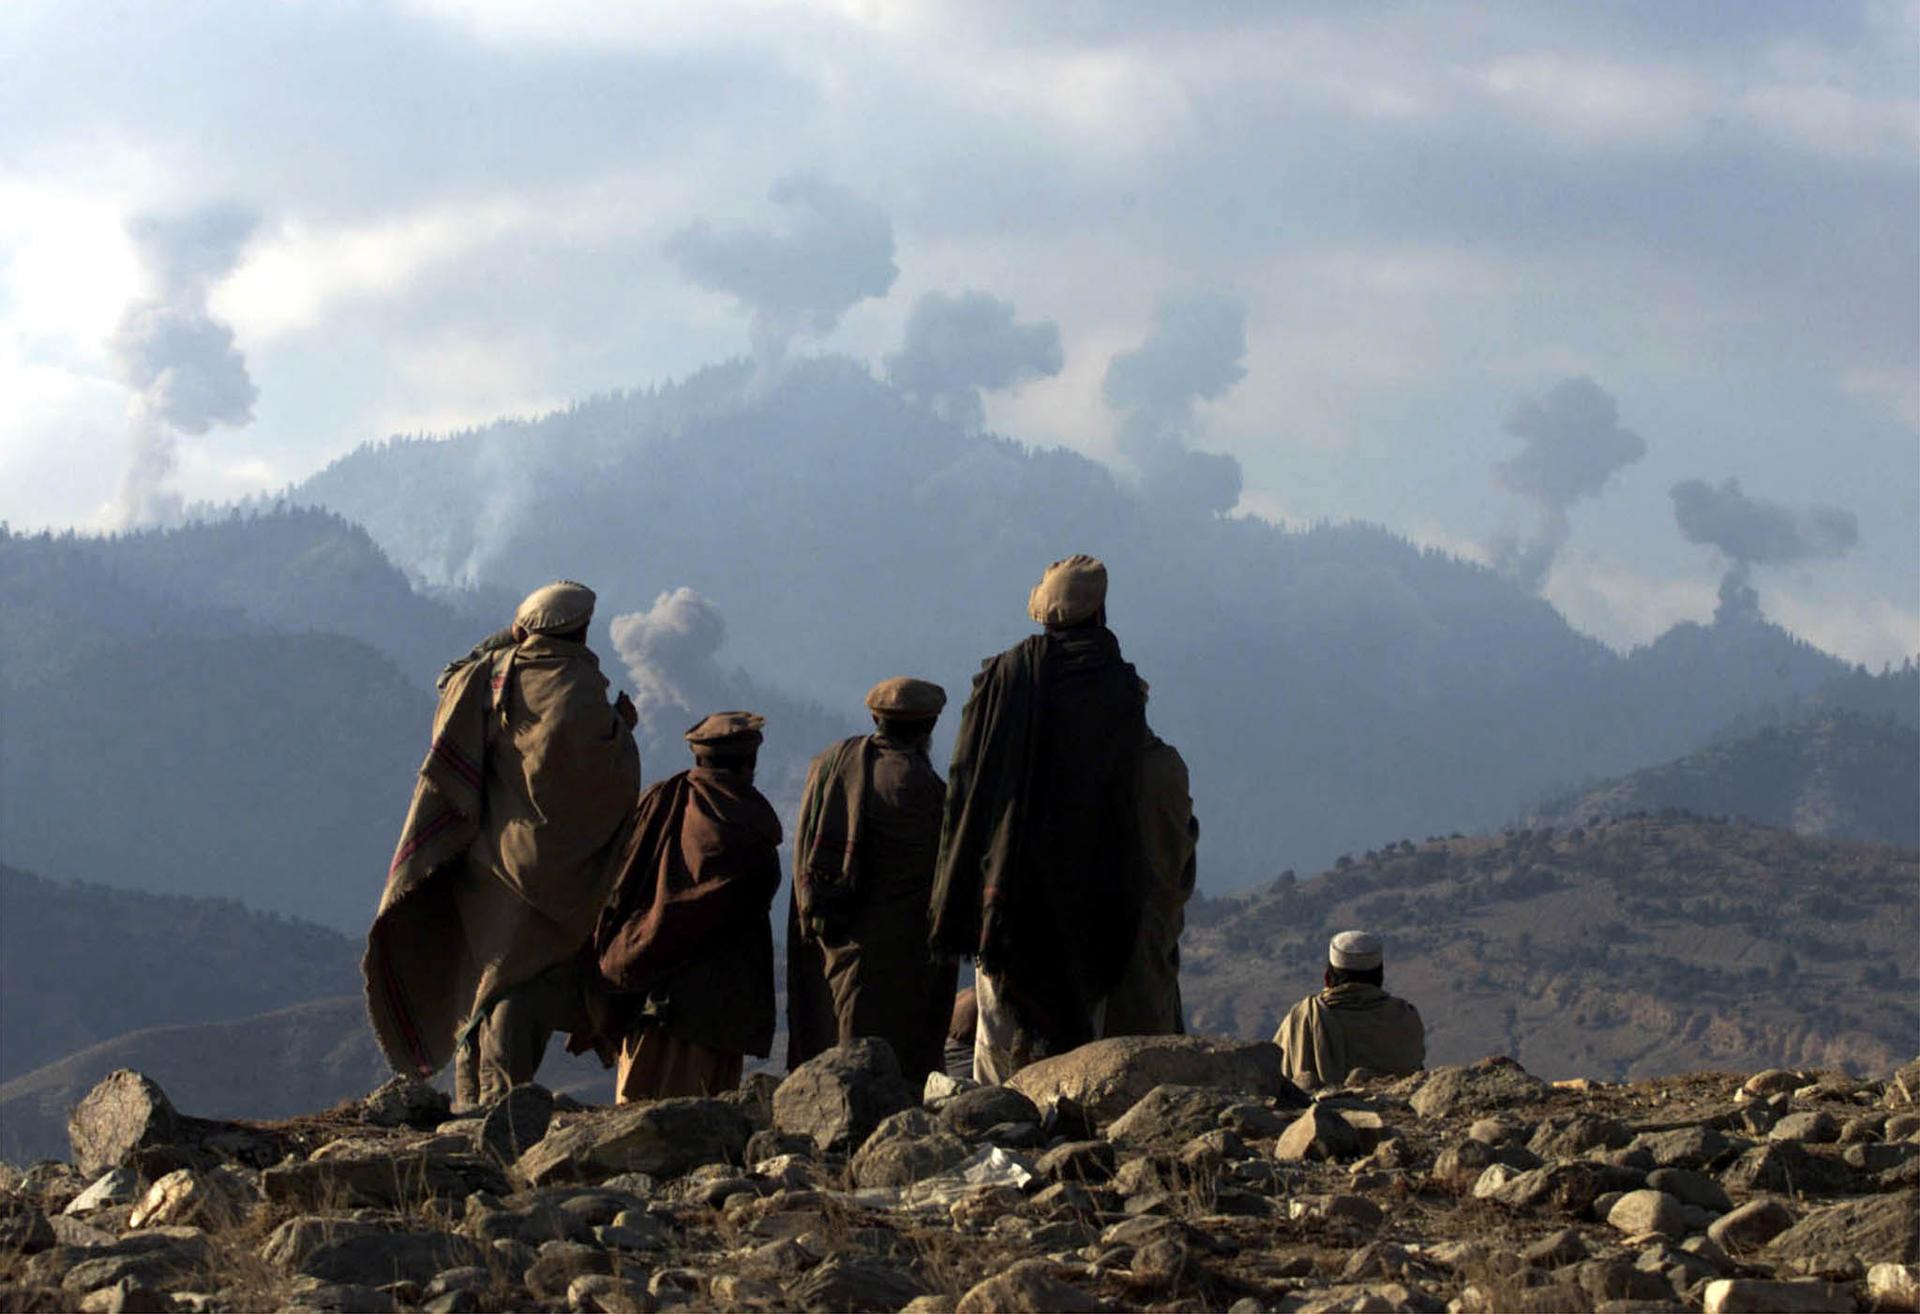 Anti-Taliban Afghan fighters watch several explosions from U.S. bombings in the Tora Bora mountains in Afghanistan December 16, 2001